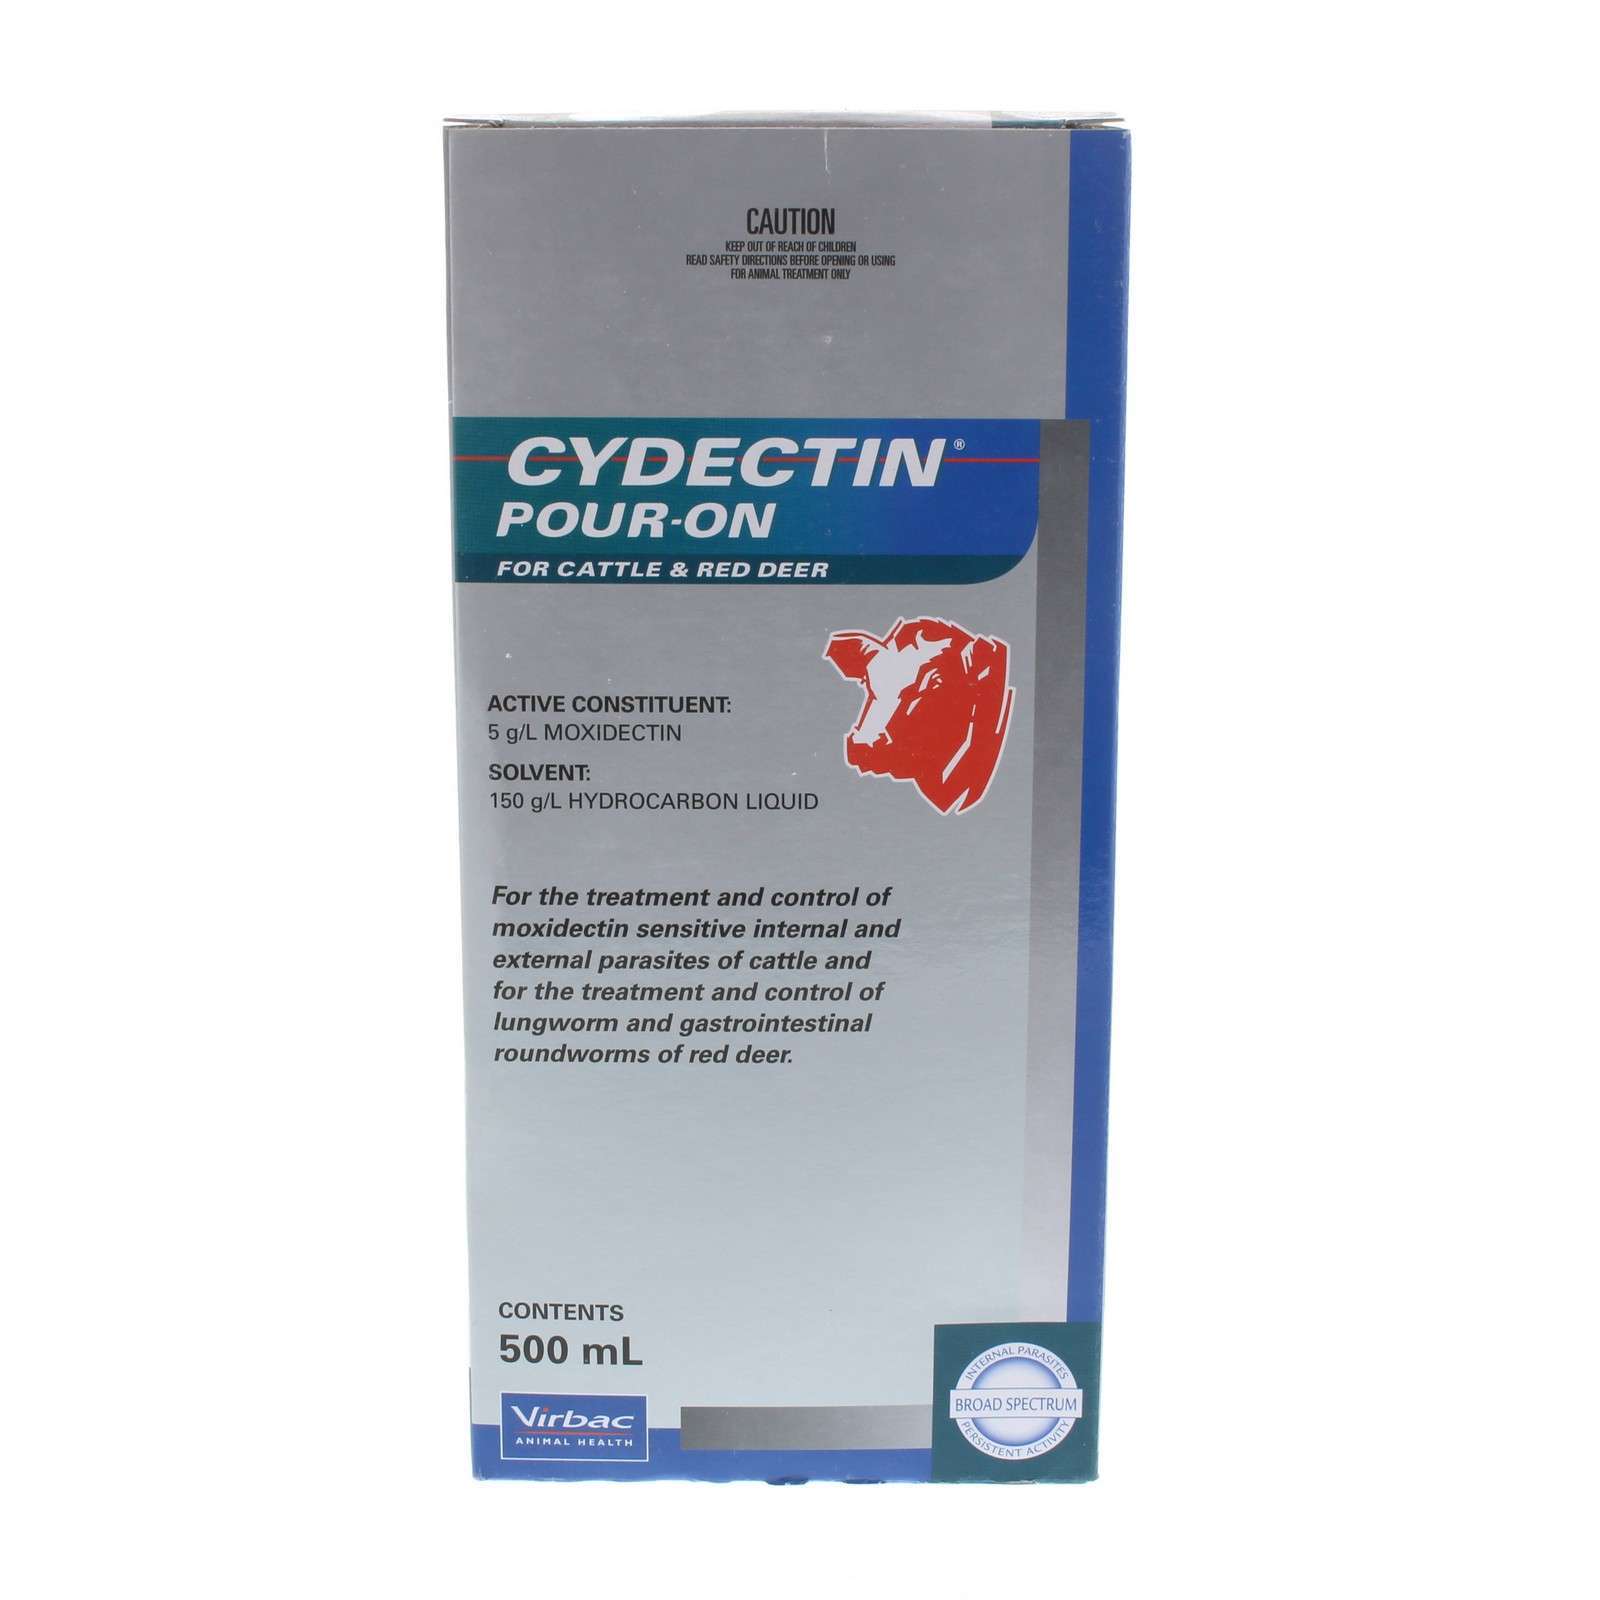 buy-cydectin-2-la-injection-500ml-from-fane-valley-stores-agricultural